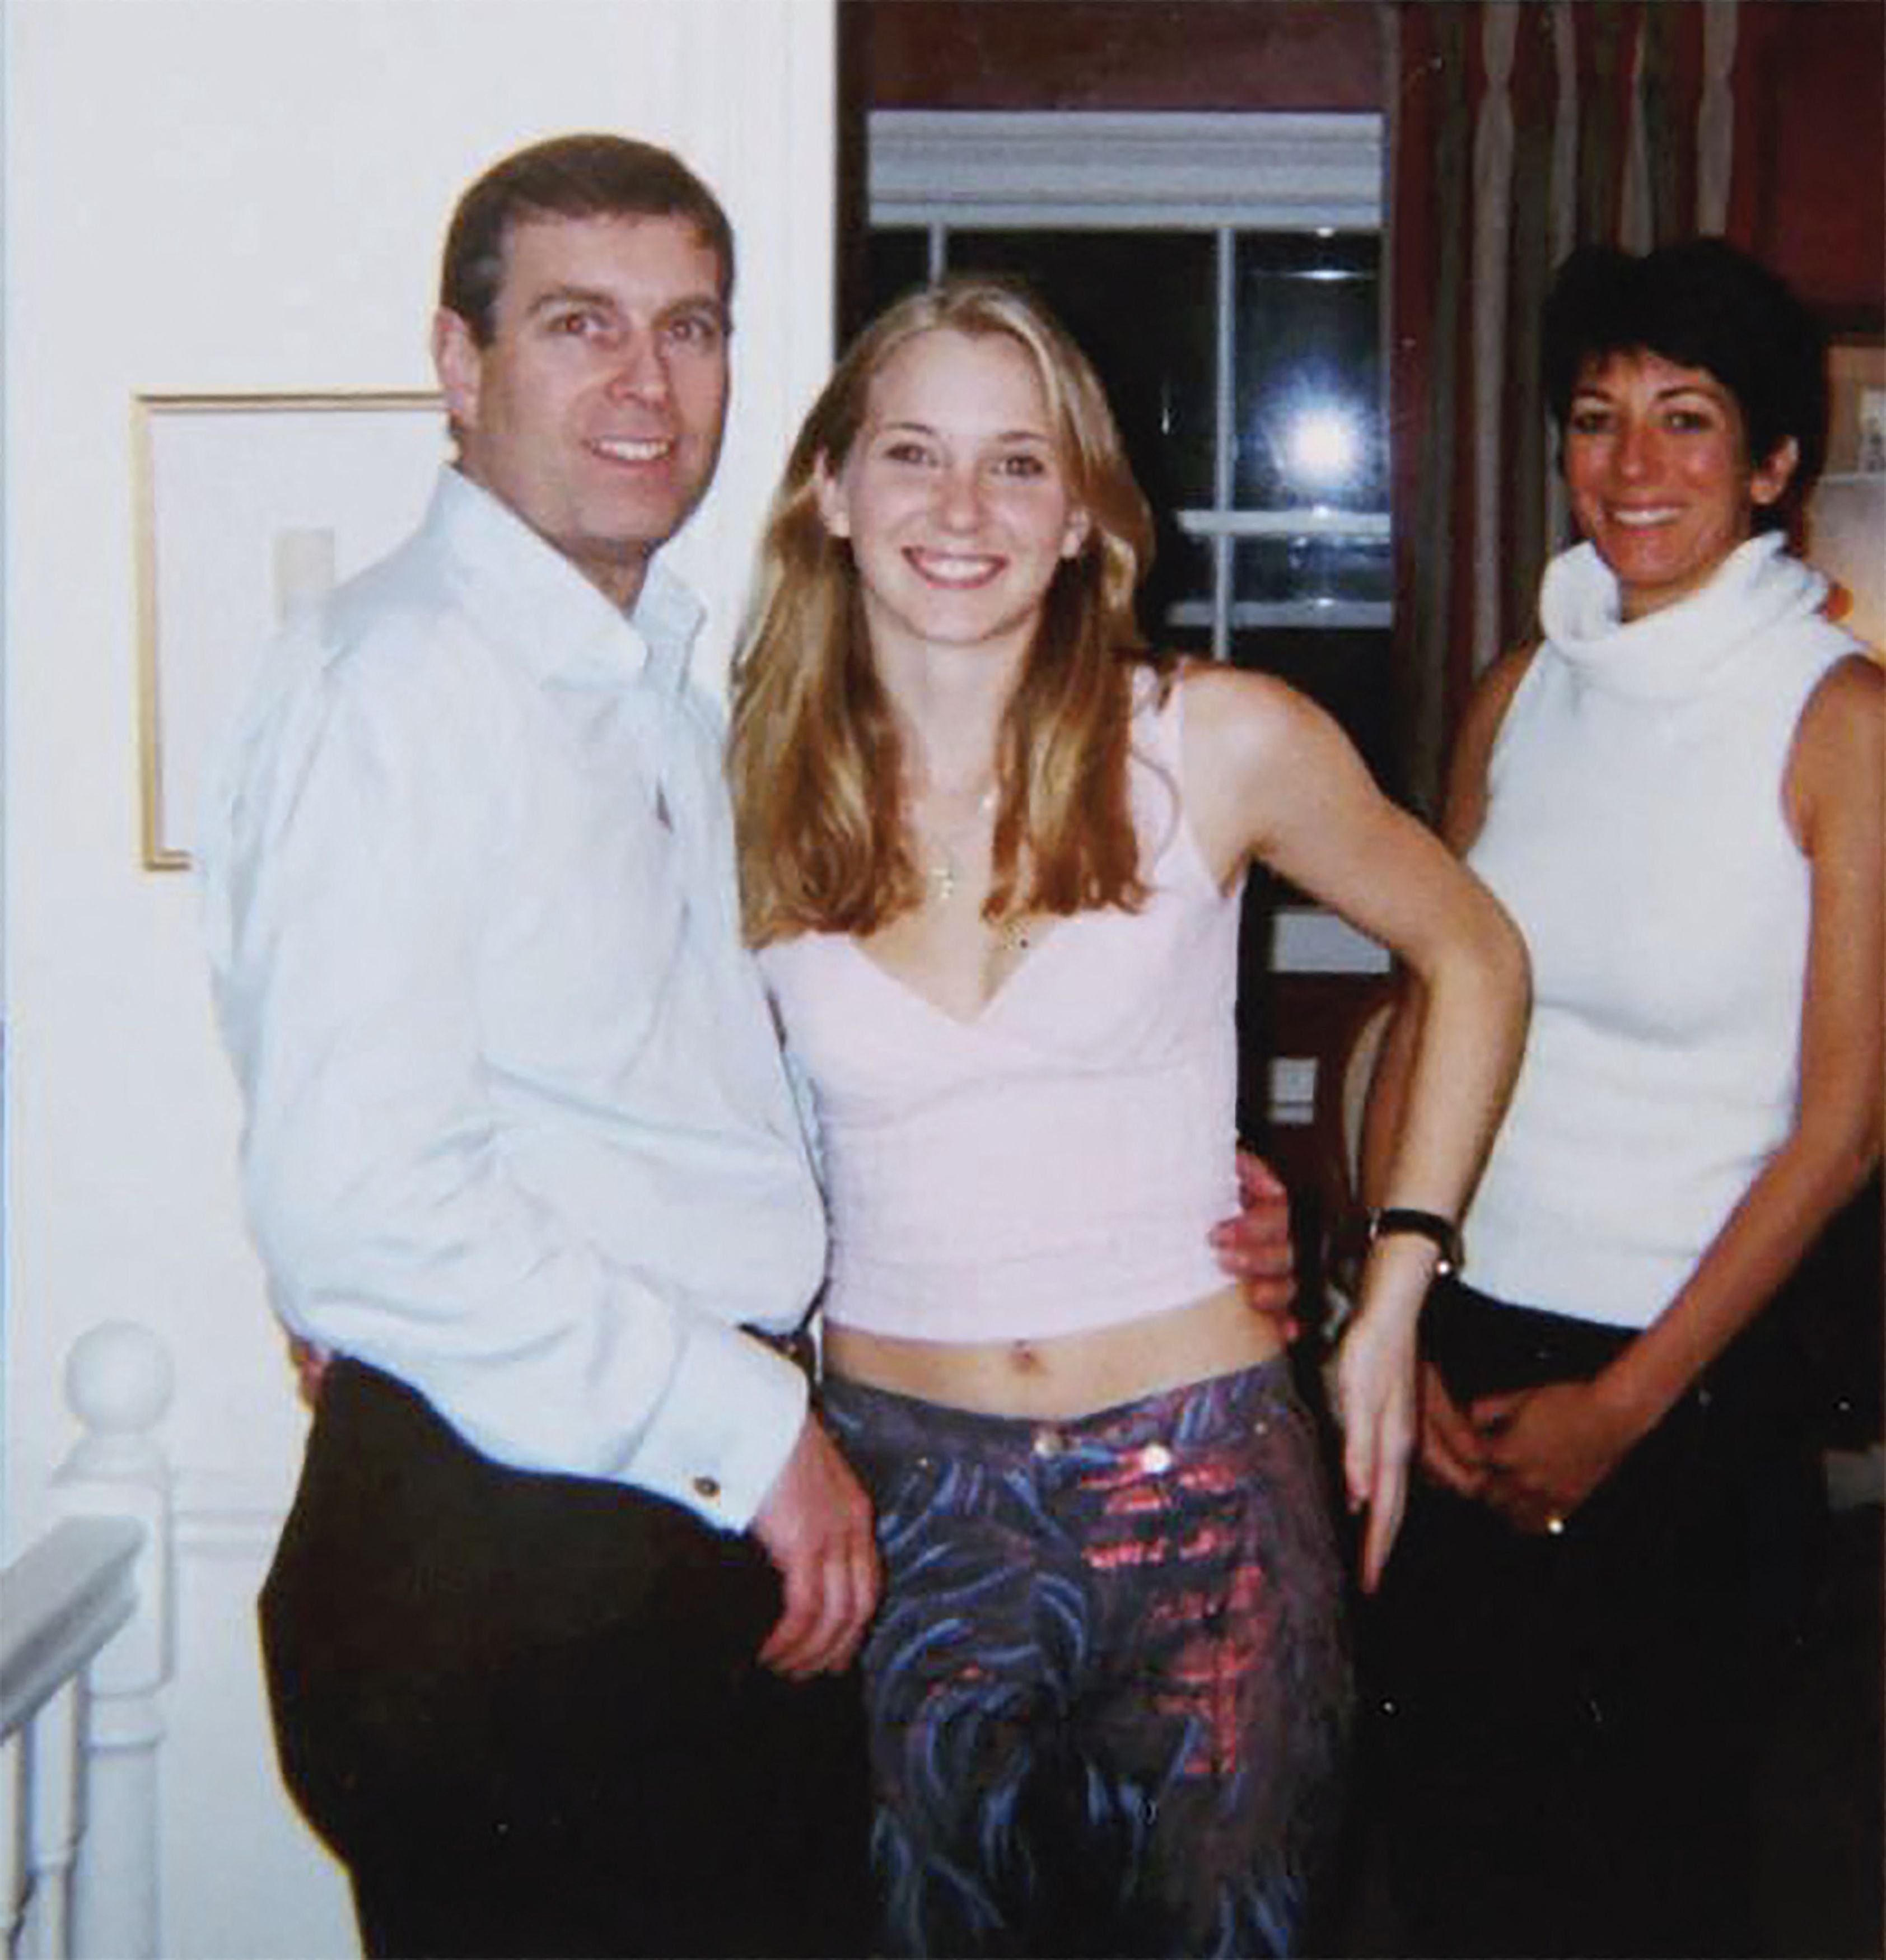 Prince Andrew was famously photographed with his arm around Virginia Giuffre’s waist